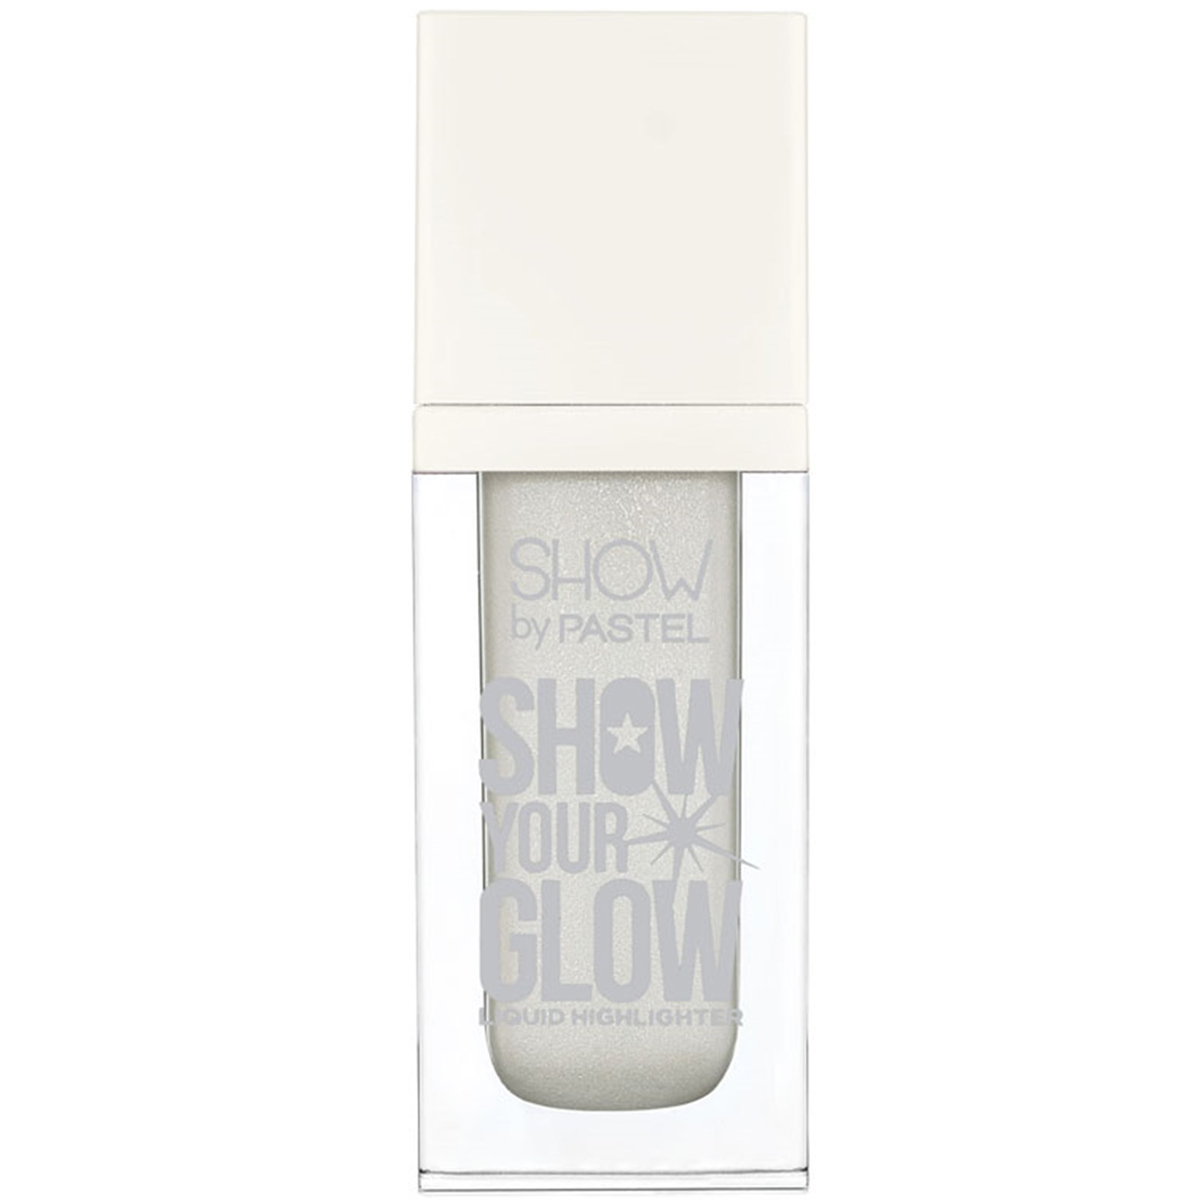 Pastel Show By Pastel Show Your Glow Liquid Highlighter 70